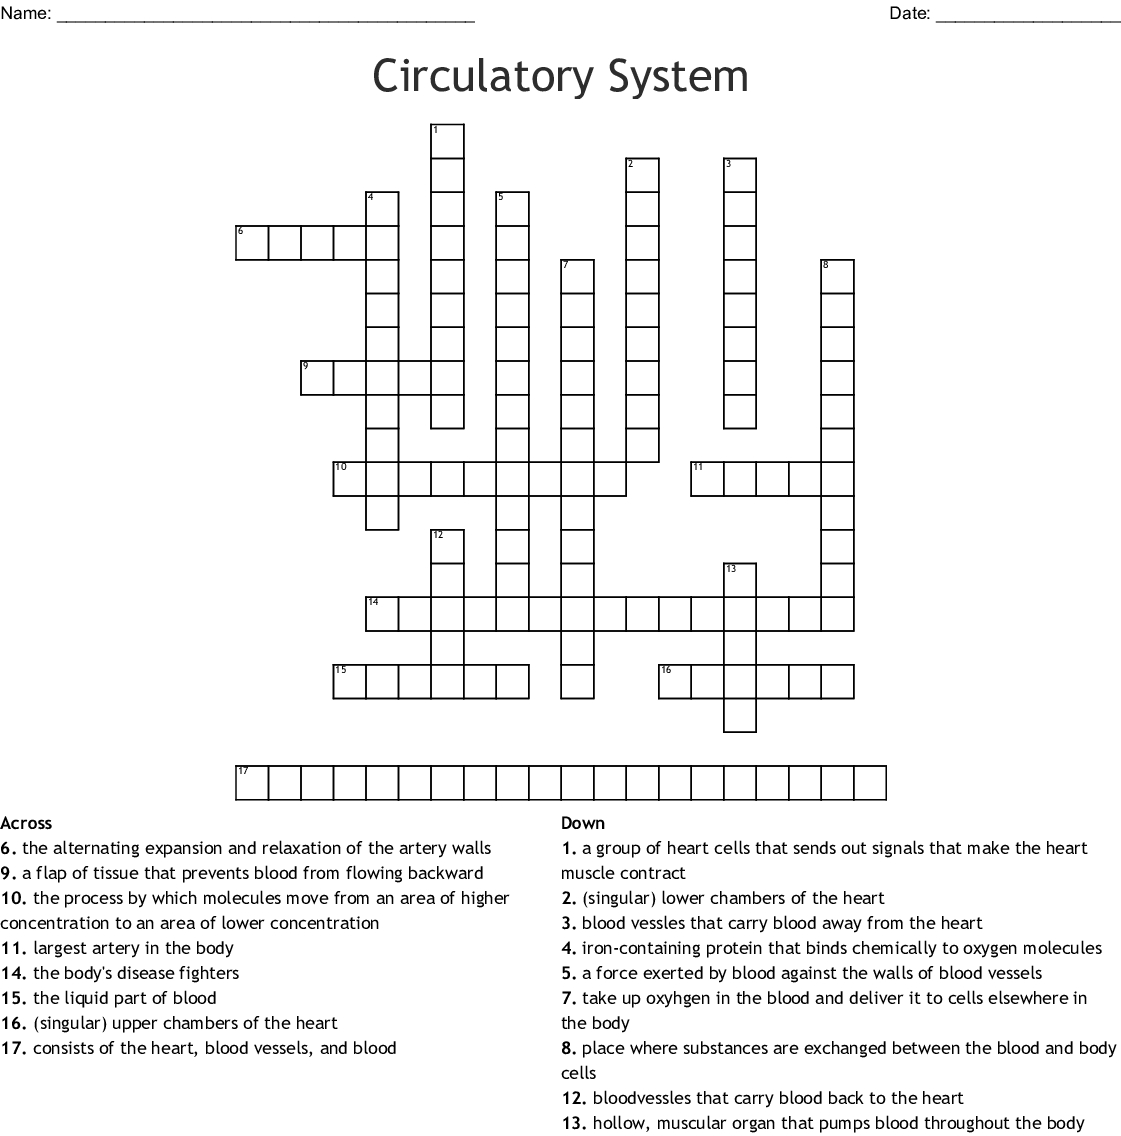 The Circulatory System Word Search - Wordmint